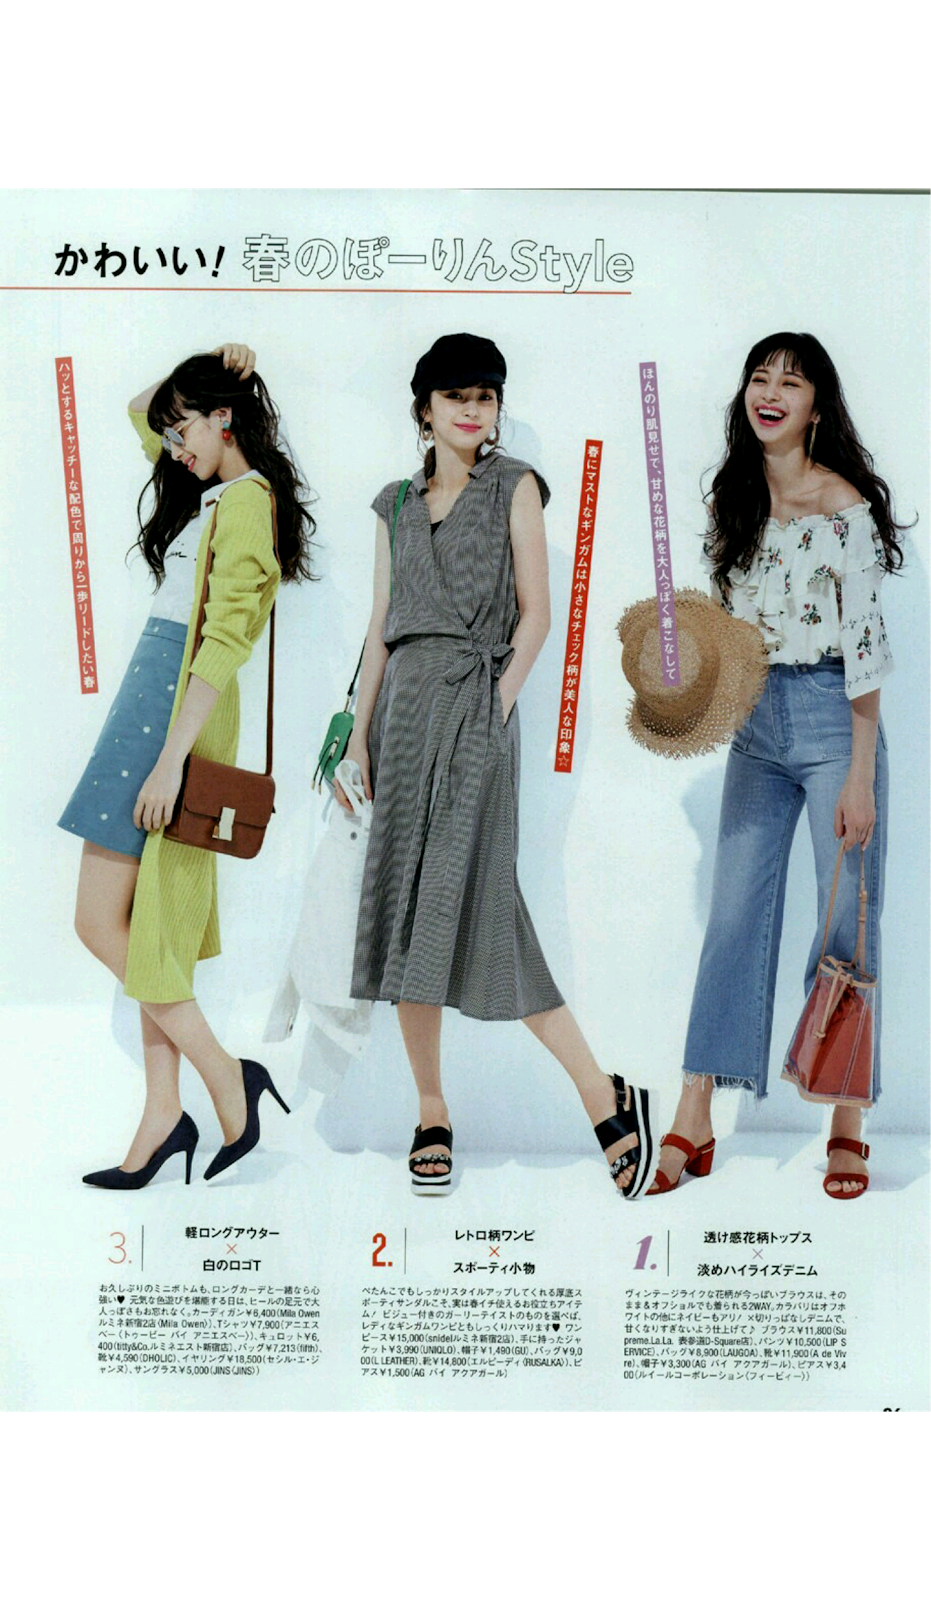 Cancam April 2018 Issue [Japanese Magazine Scans] - Beauty by Rayne